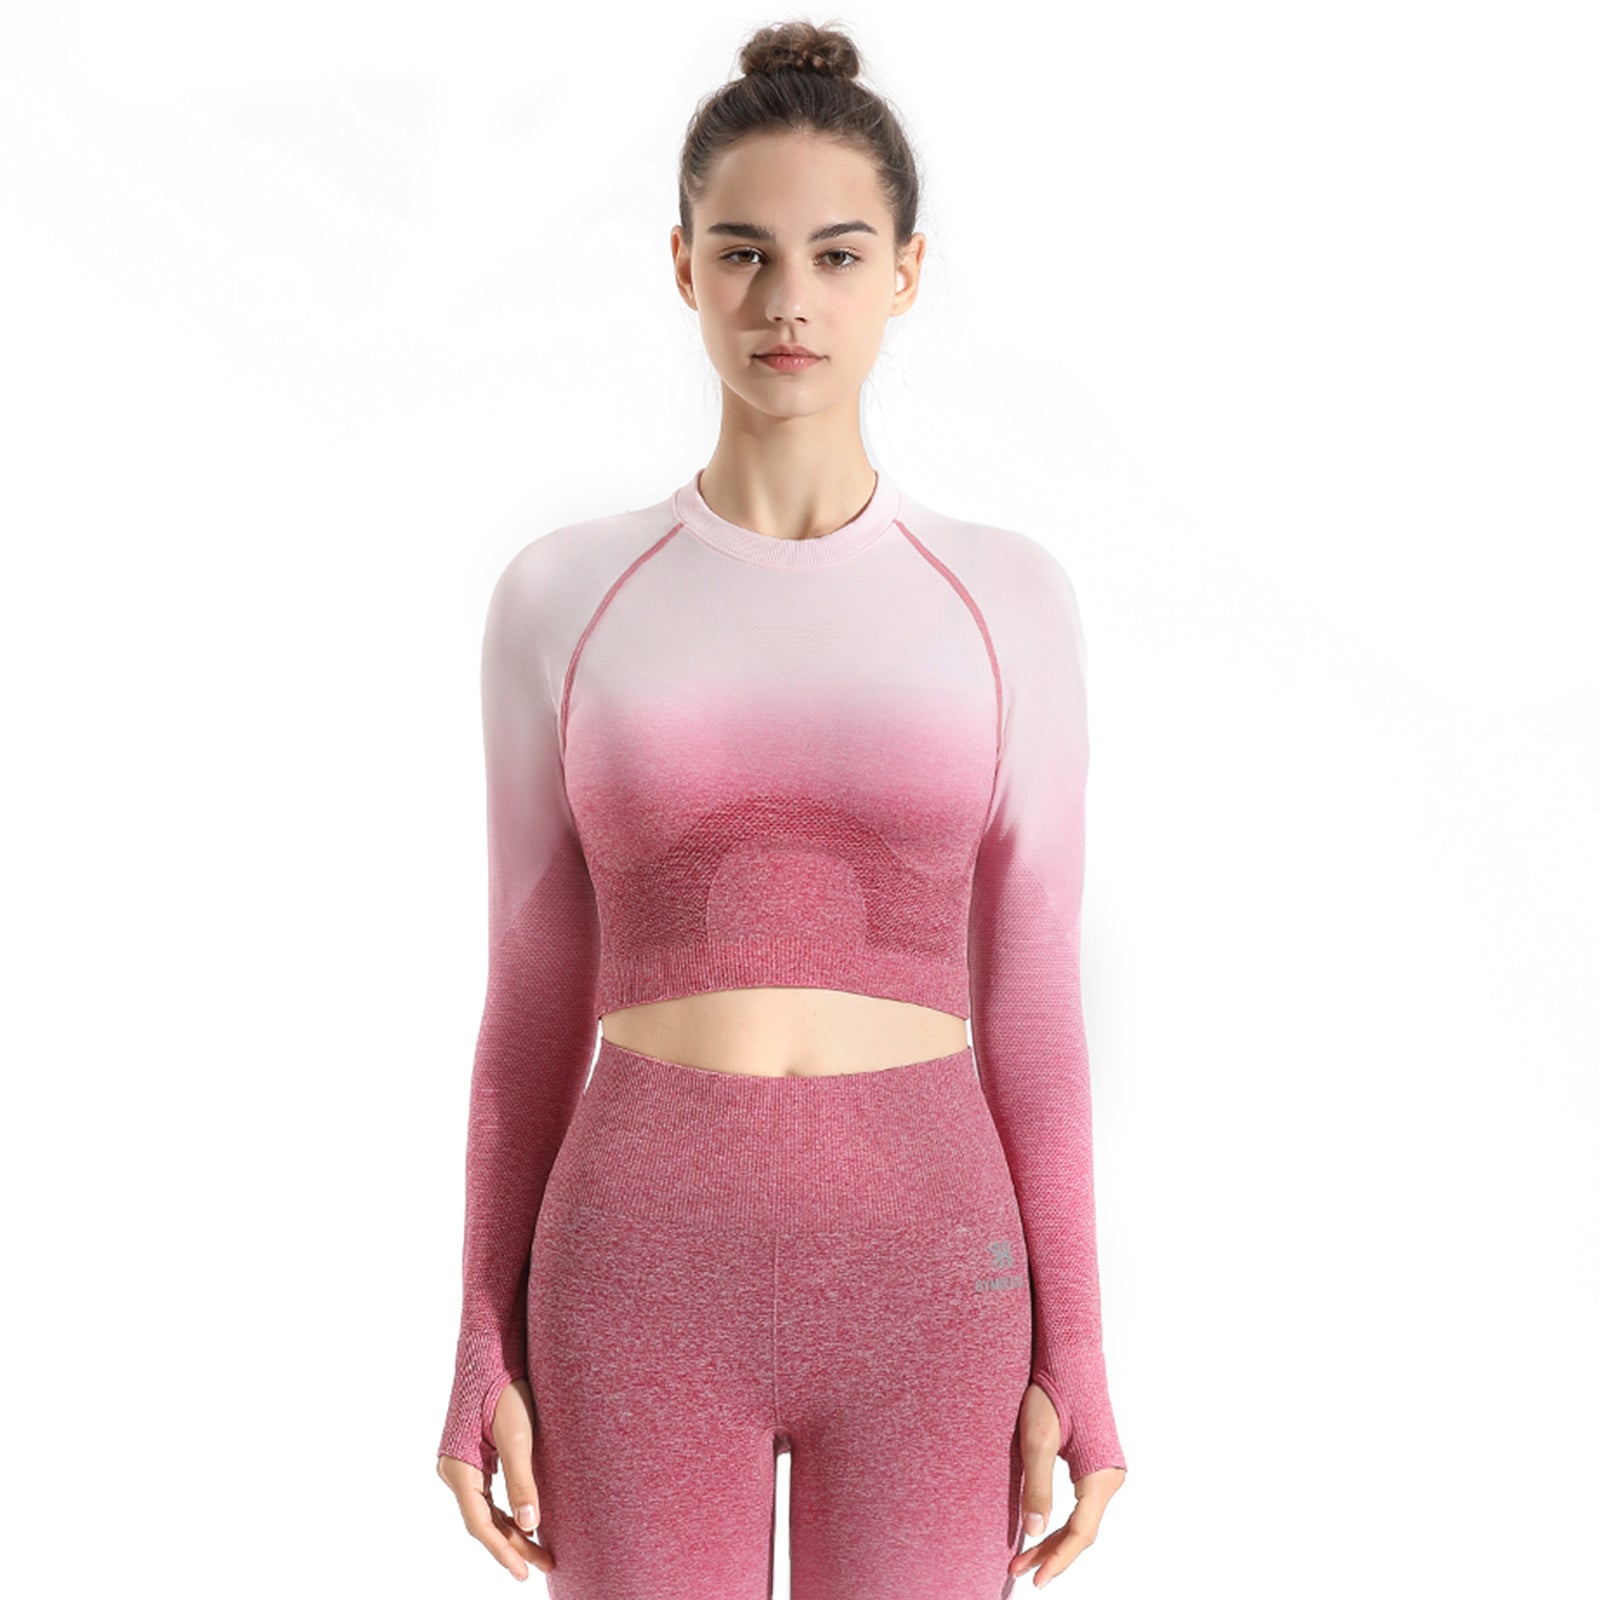 Pro-Fit Soft Touch Ombre Sports Top - Profit Outfits